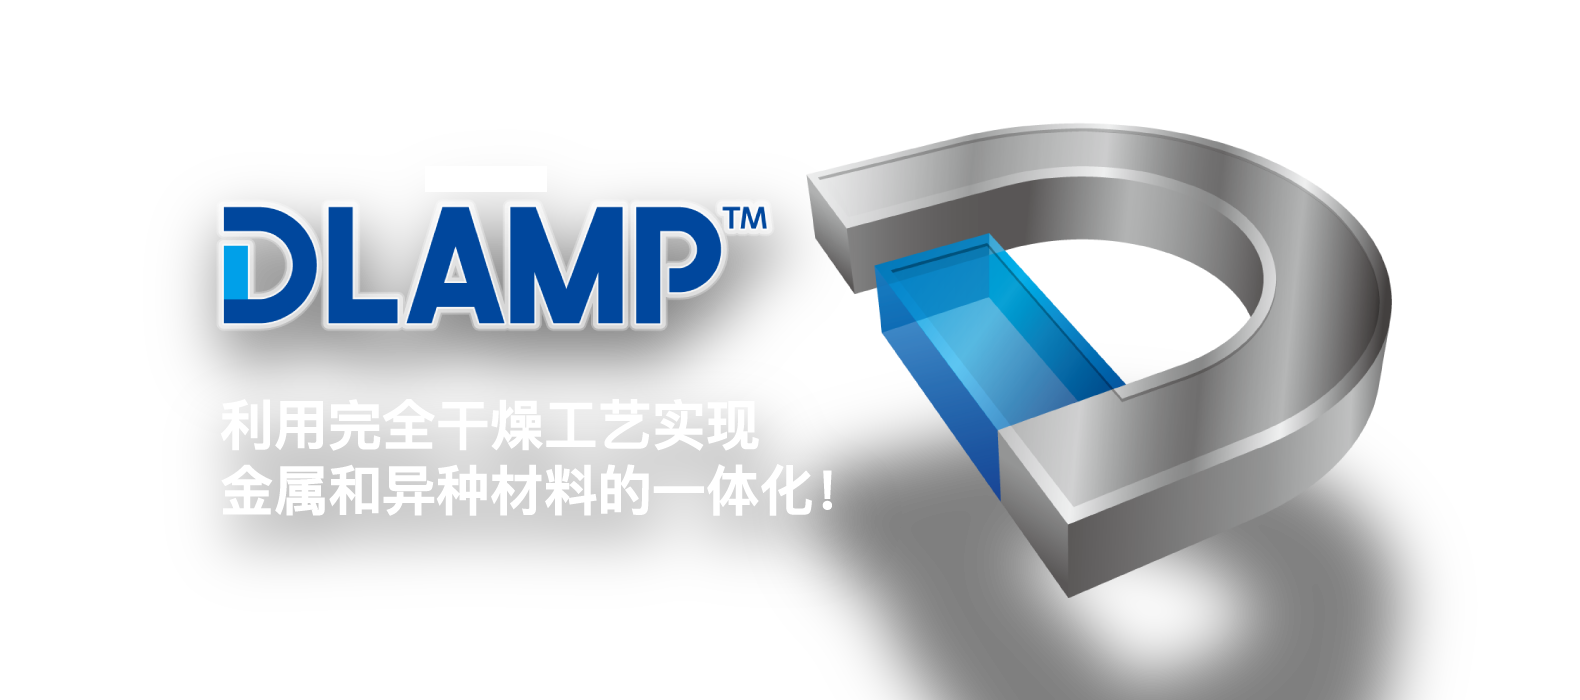 DLAMP is NEW joining technology for metal and dissimilar materials.